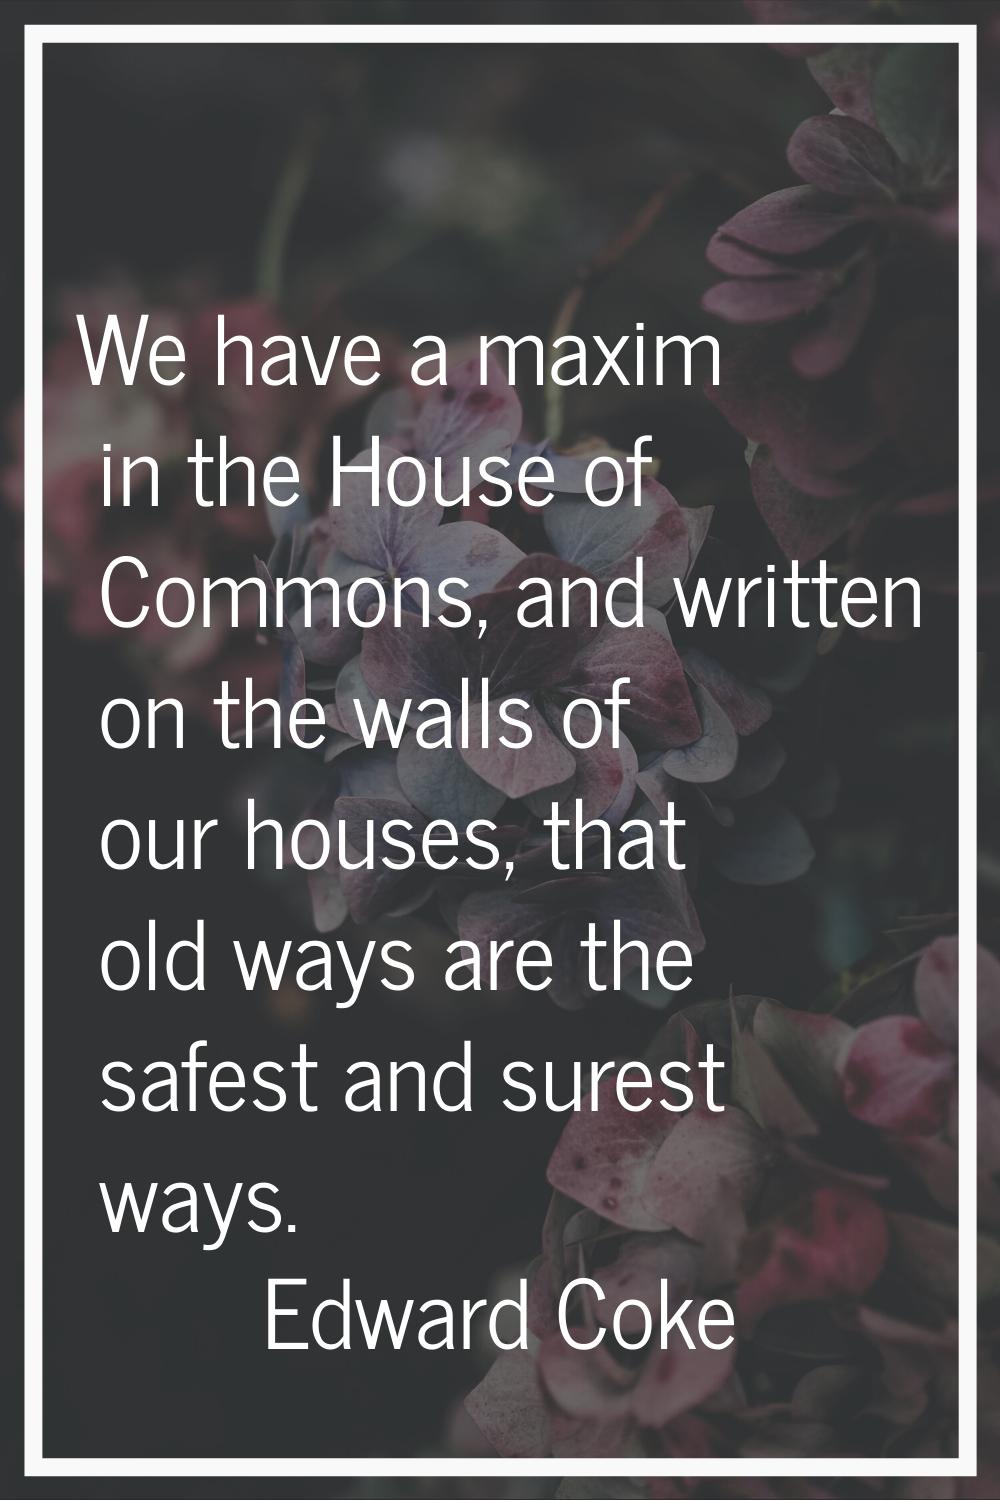 We have a maxim in the House of Commons, and written on the walls of our houses, that old ways are 